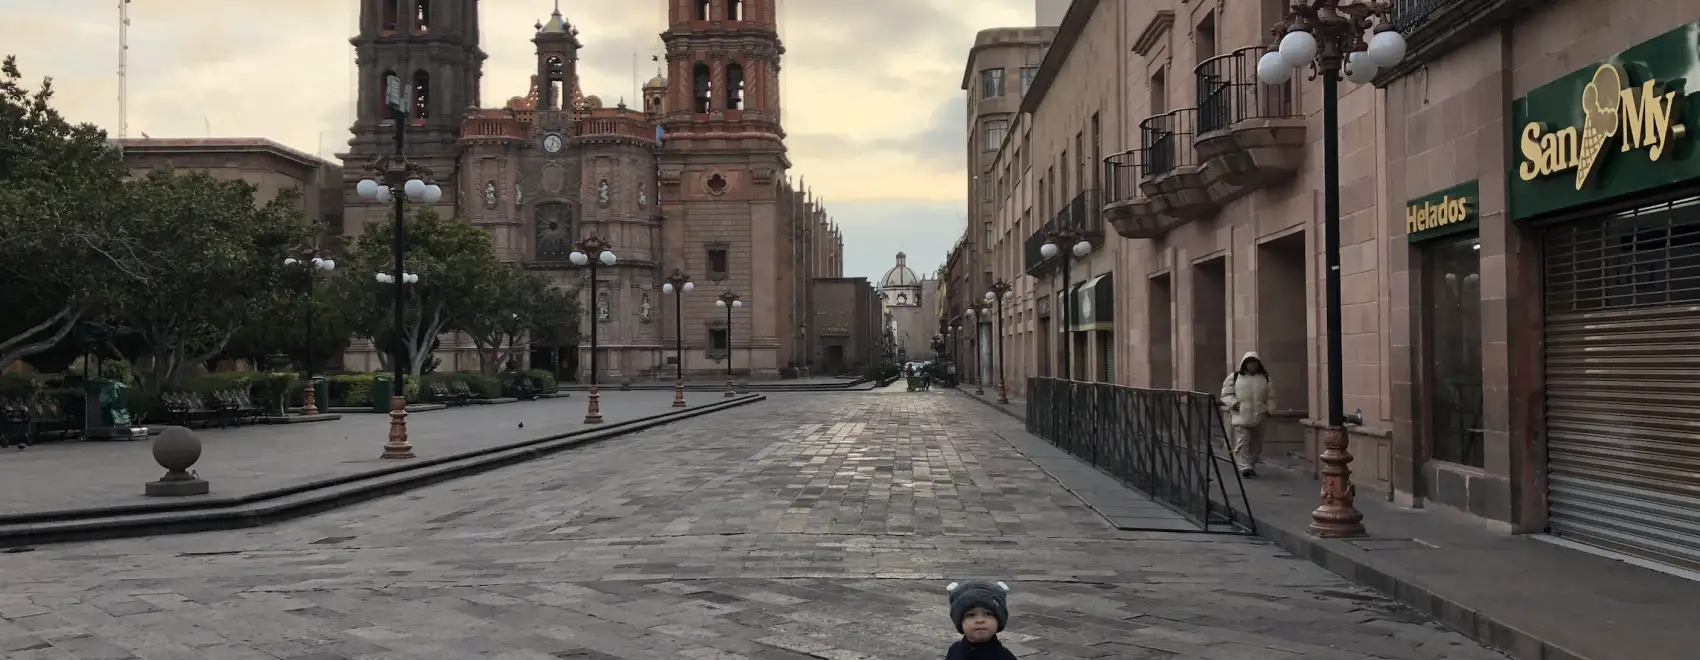 What It's Like to Live in the Center of San Luis Potosí